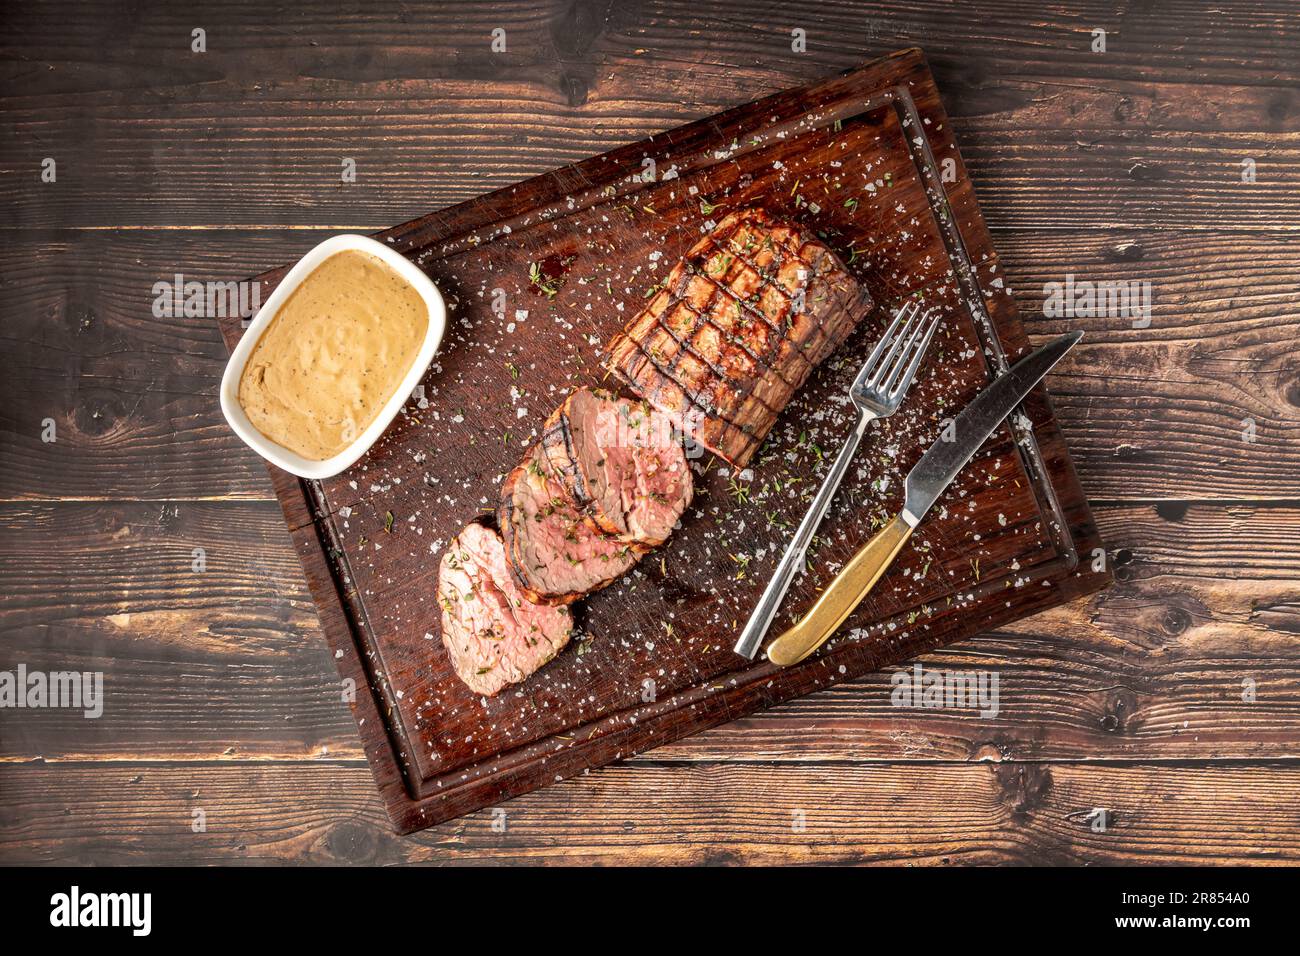 Sliced grilled beef tenderloin seasoned with salt, rosemary and thyme on a wooden cutting board Stock Photo